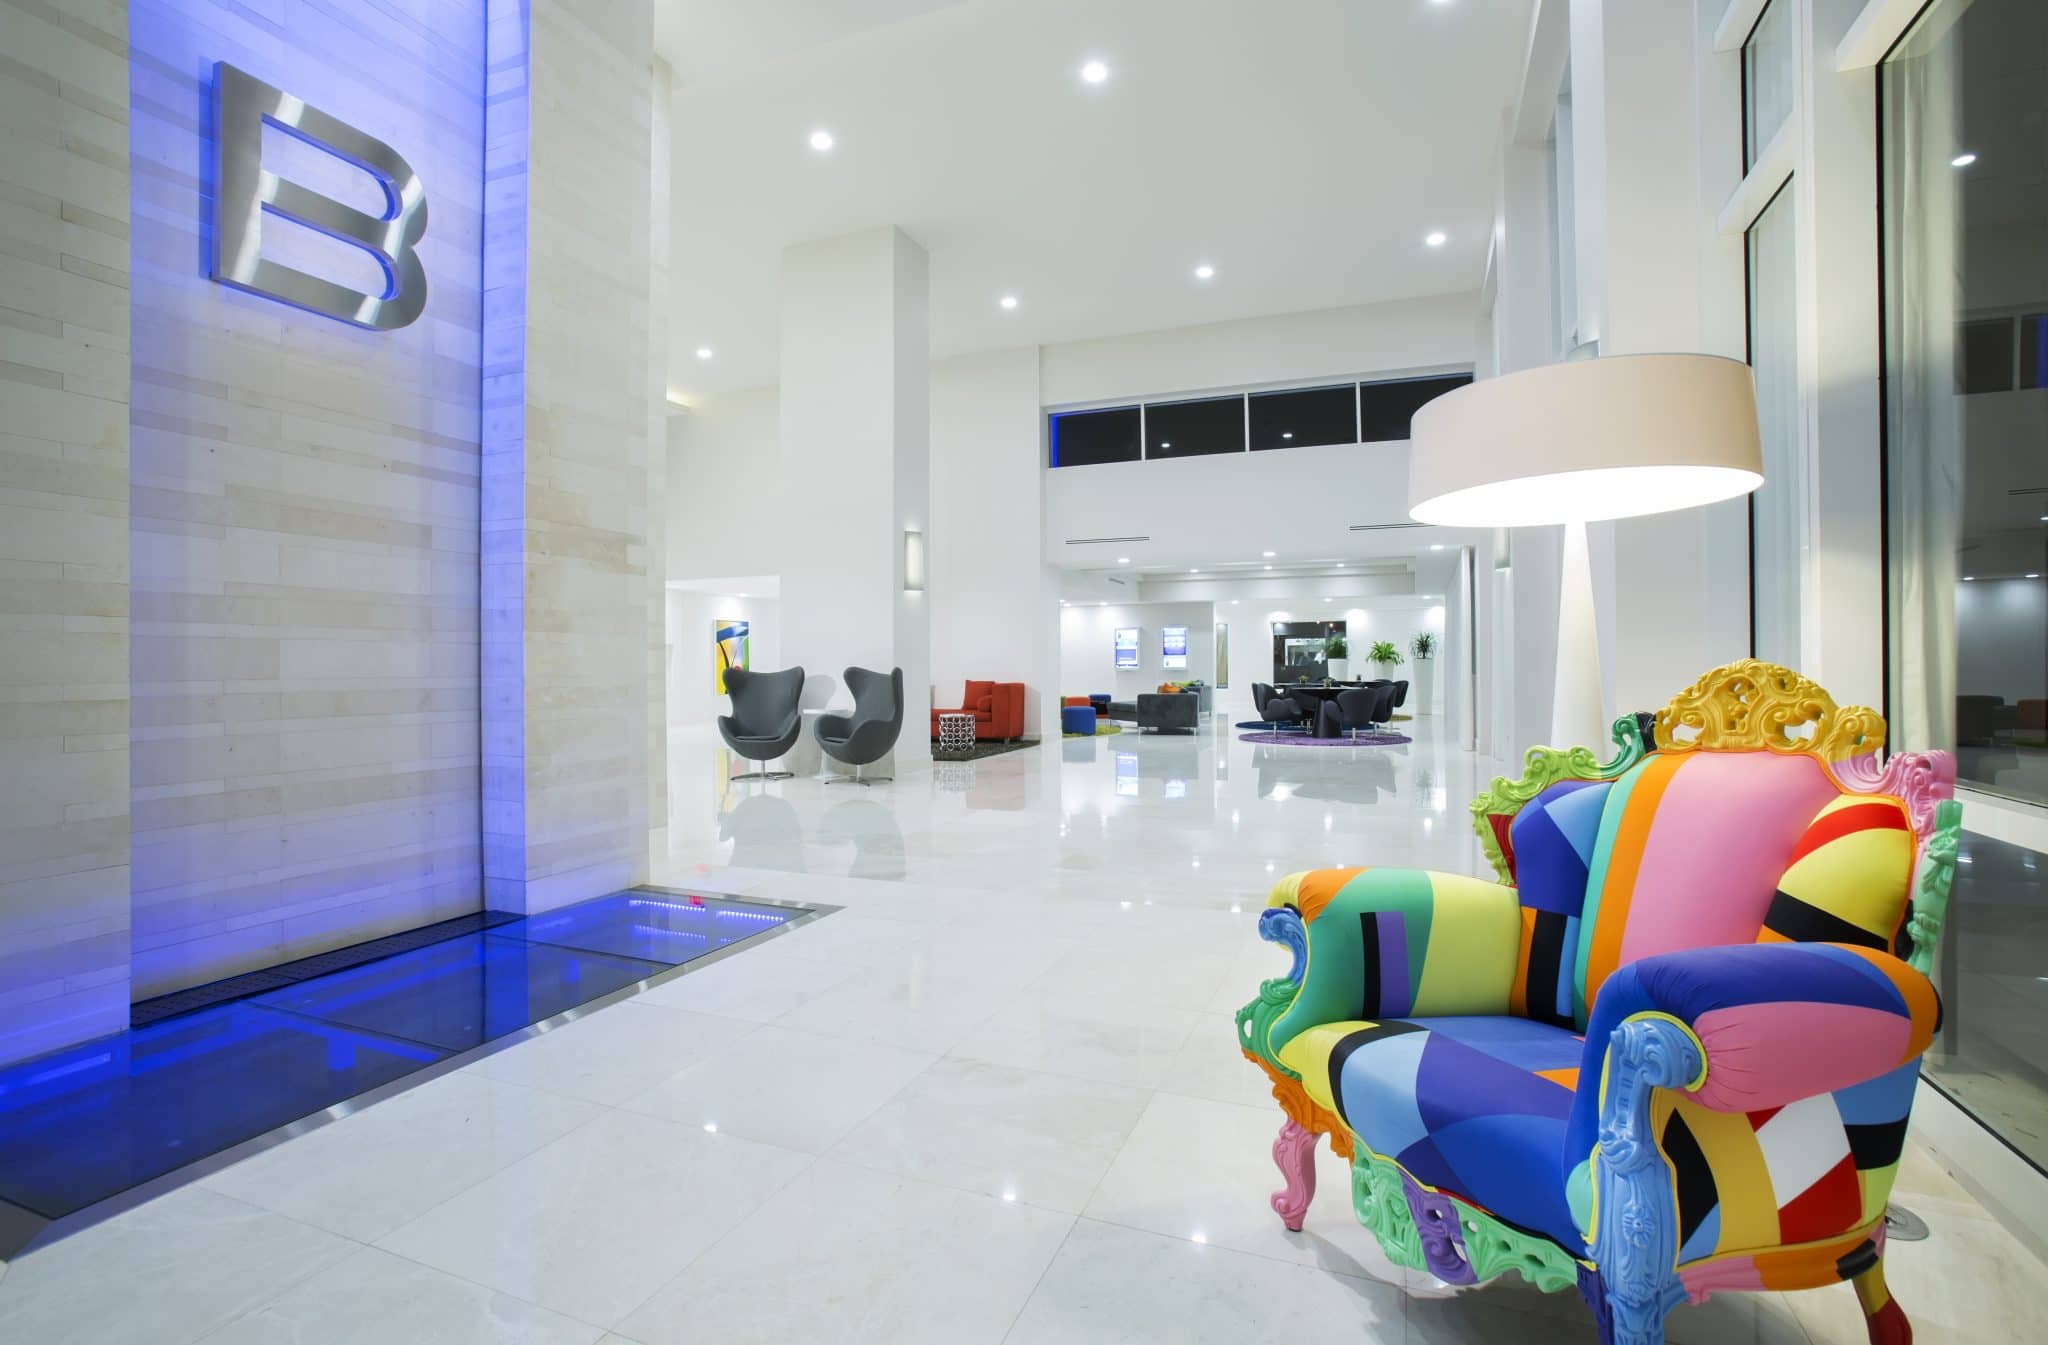 B resort & spa lobby mostly white with multi-colored seating